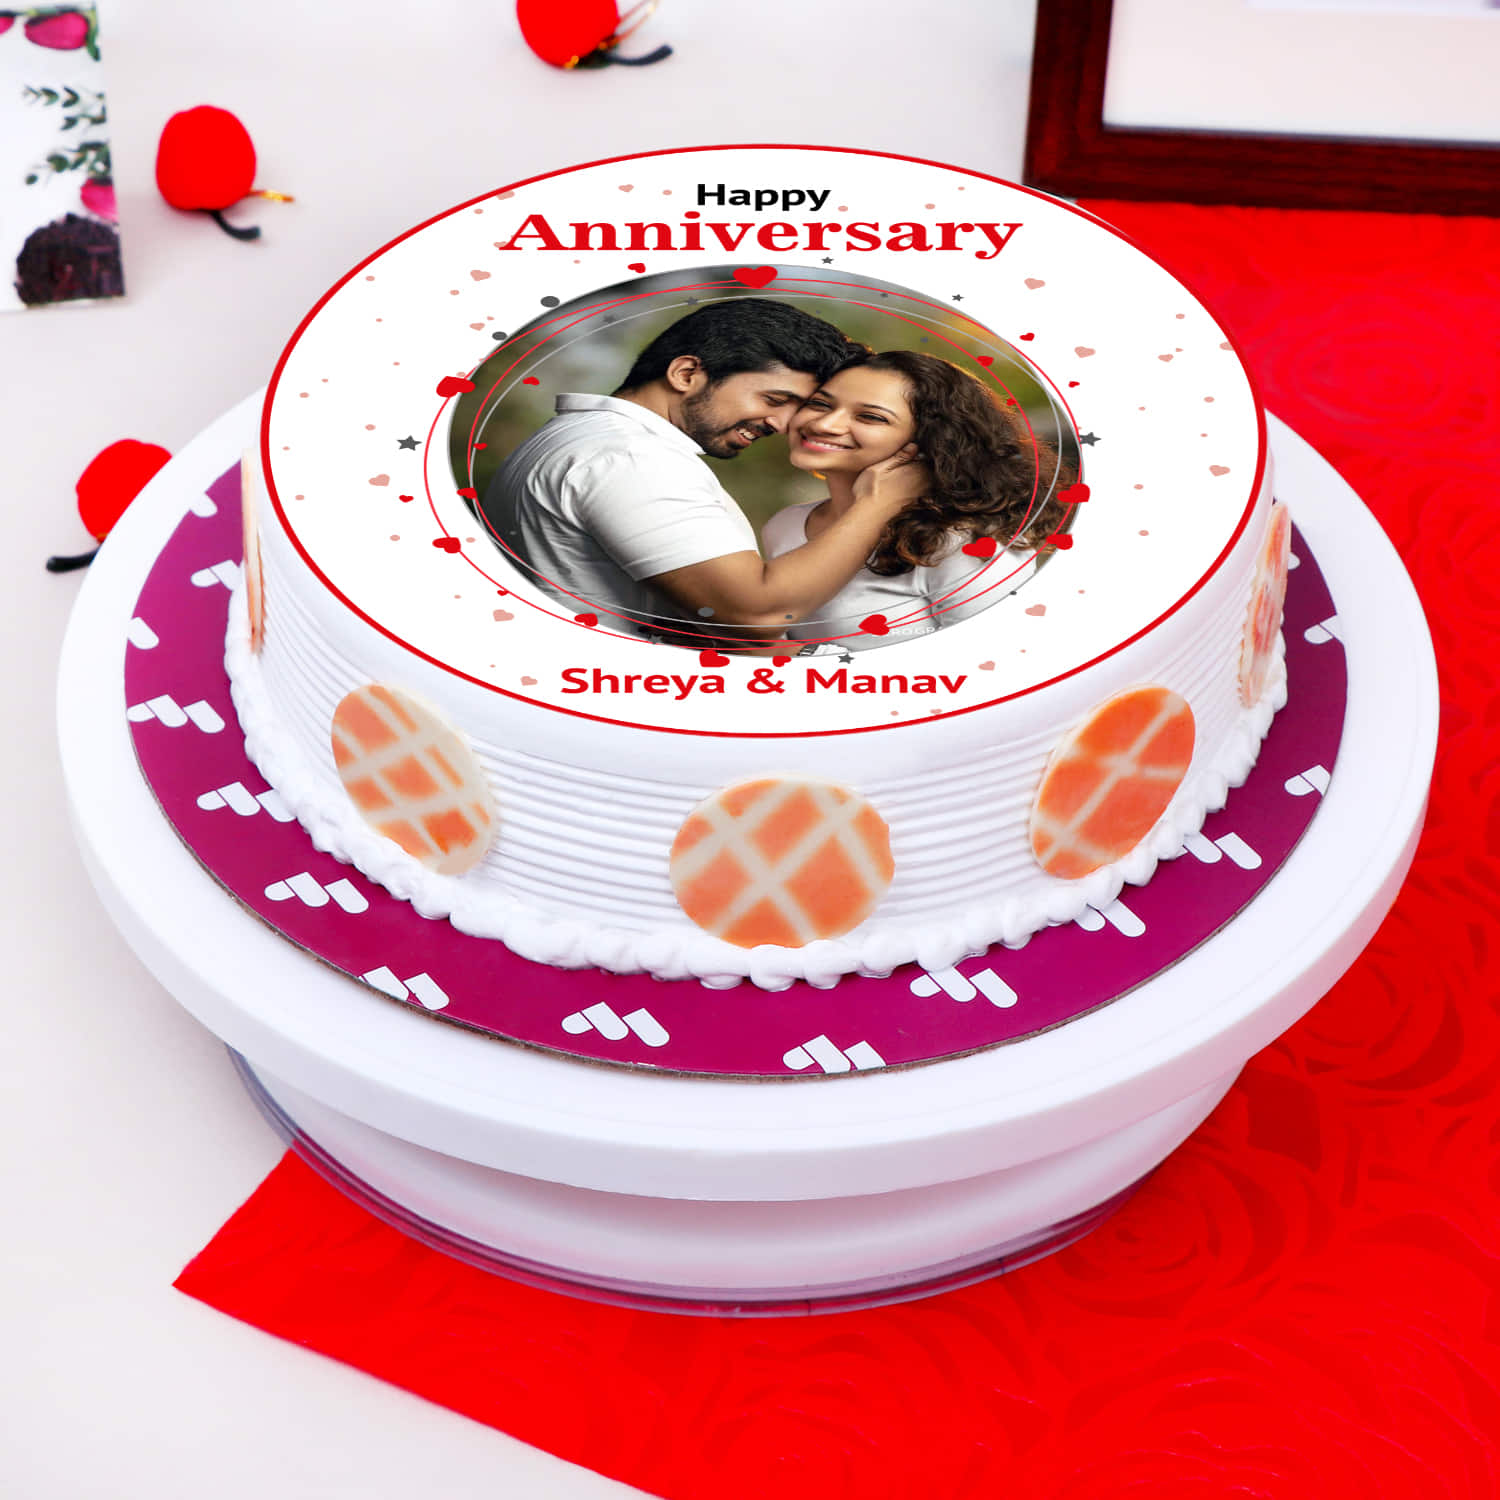 Silver Jubilee Anniversary Cake Delivery in Kerala, Order Cake for 25th  Anniversary in Kerala